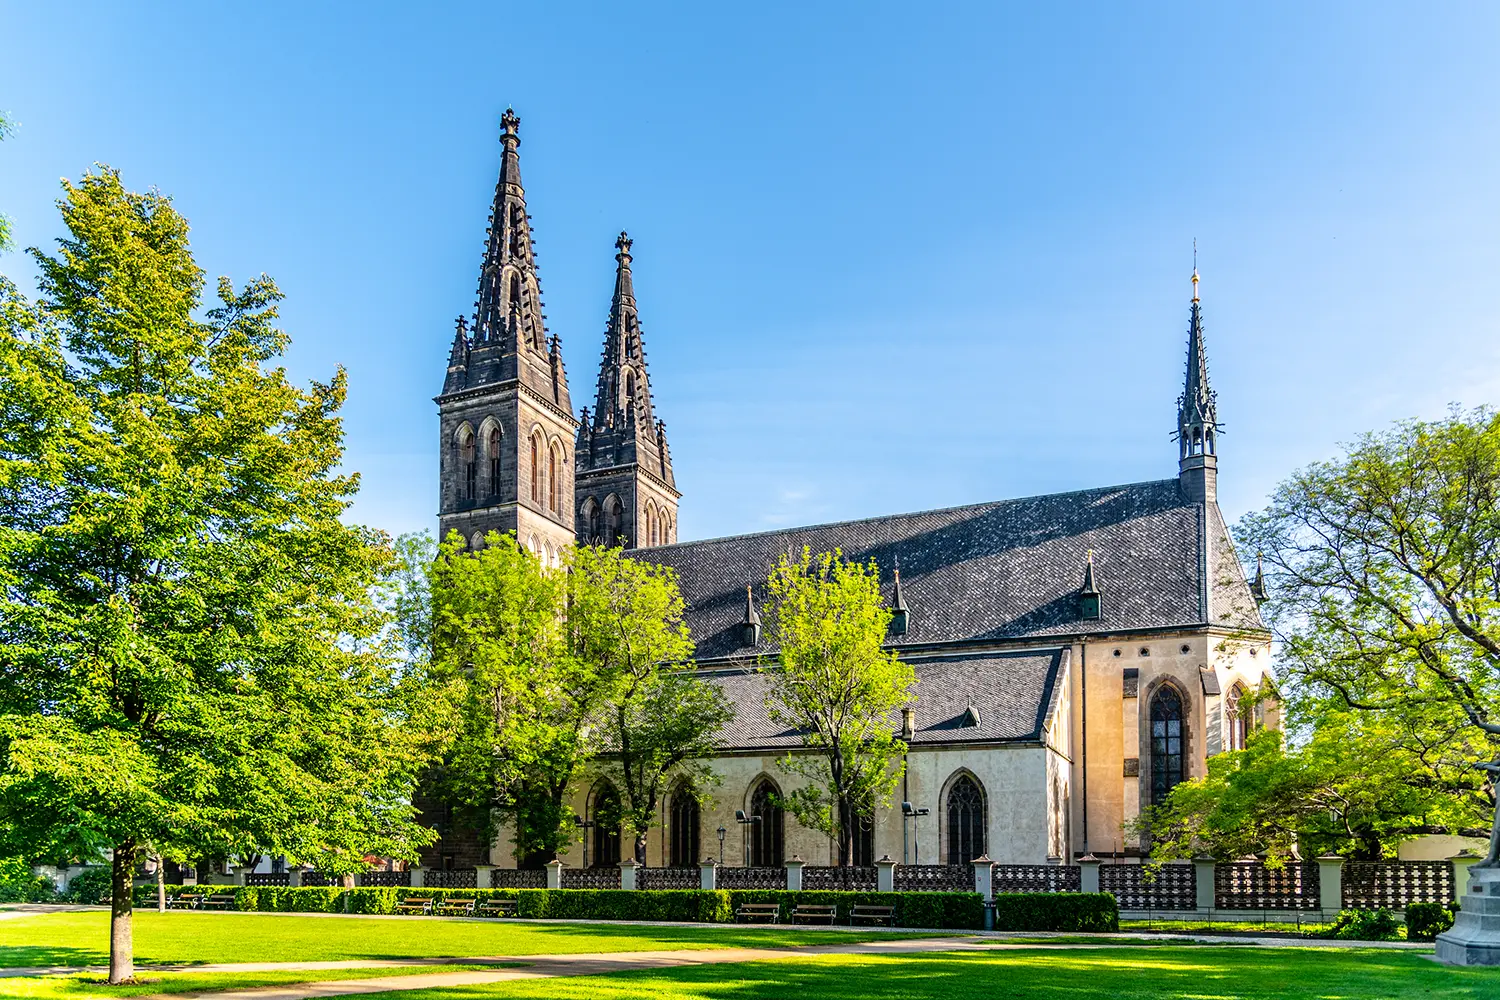 Basilica of St Peter and St Paul in Vysehrad, Prague, Czech Republic